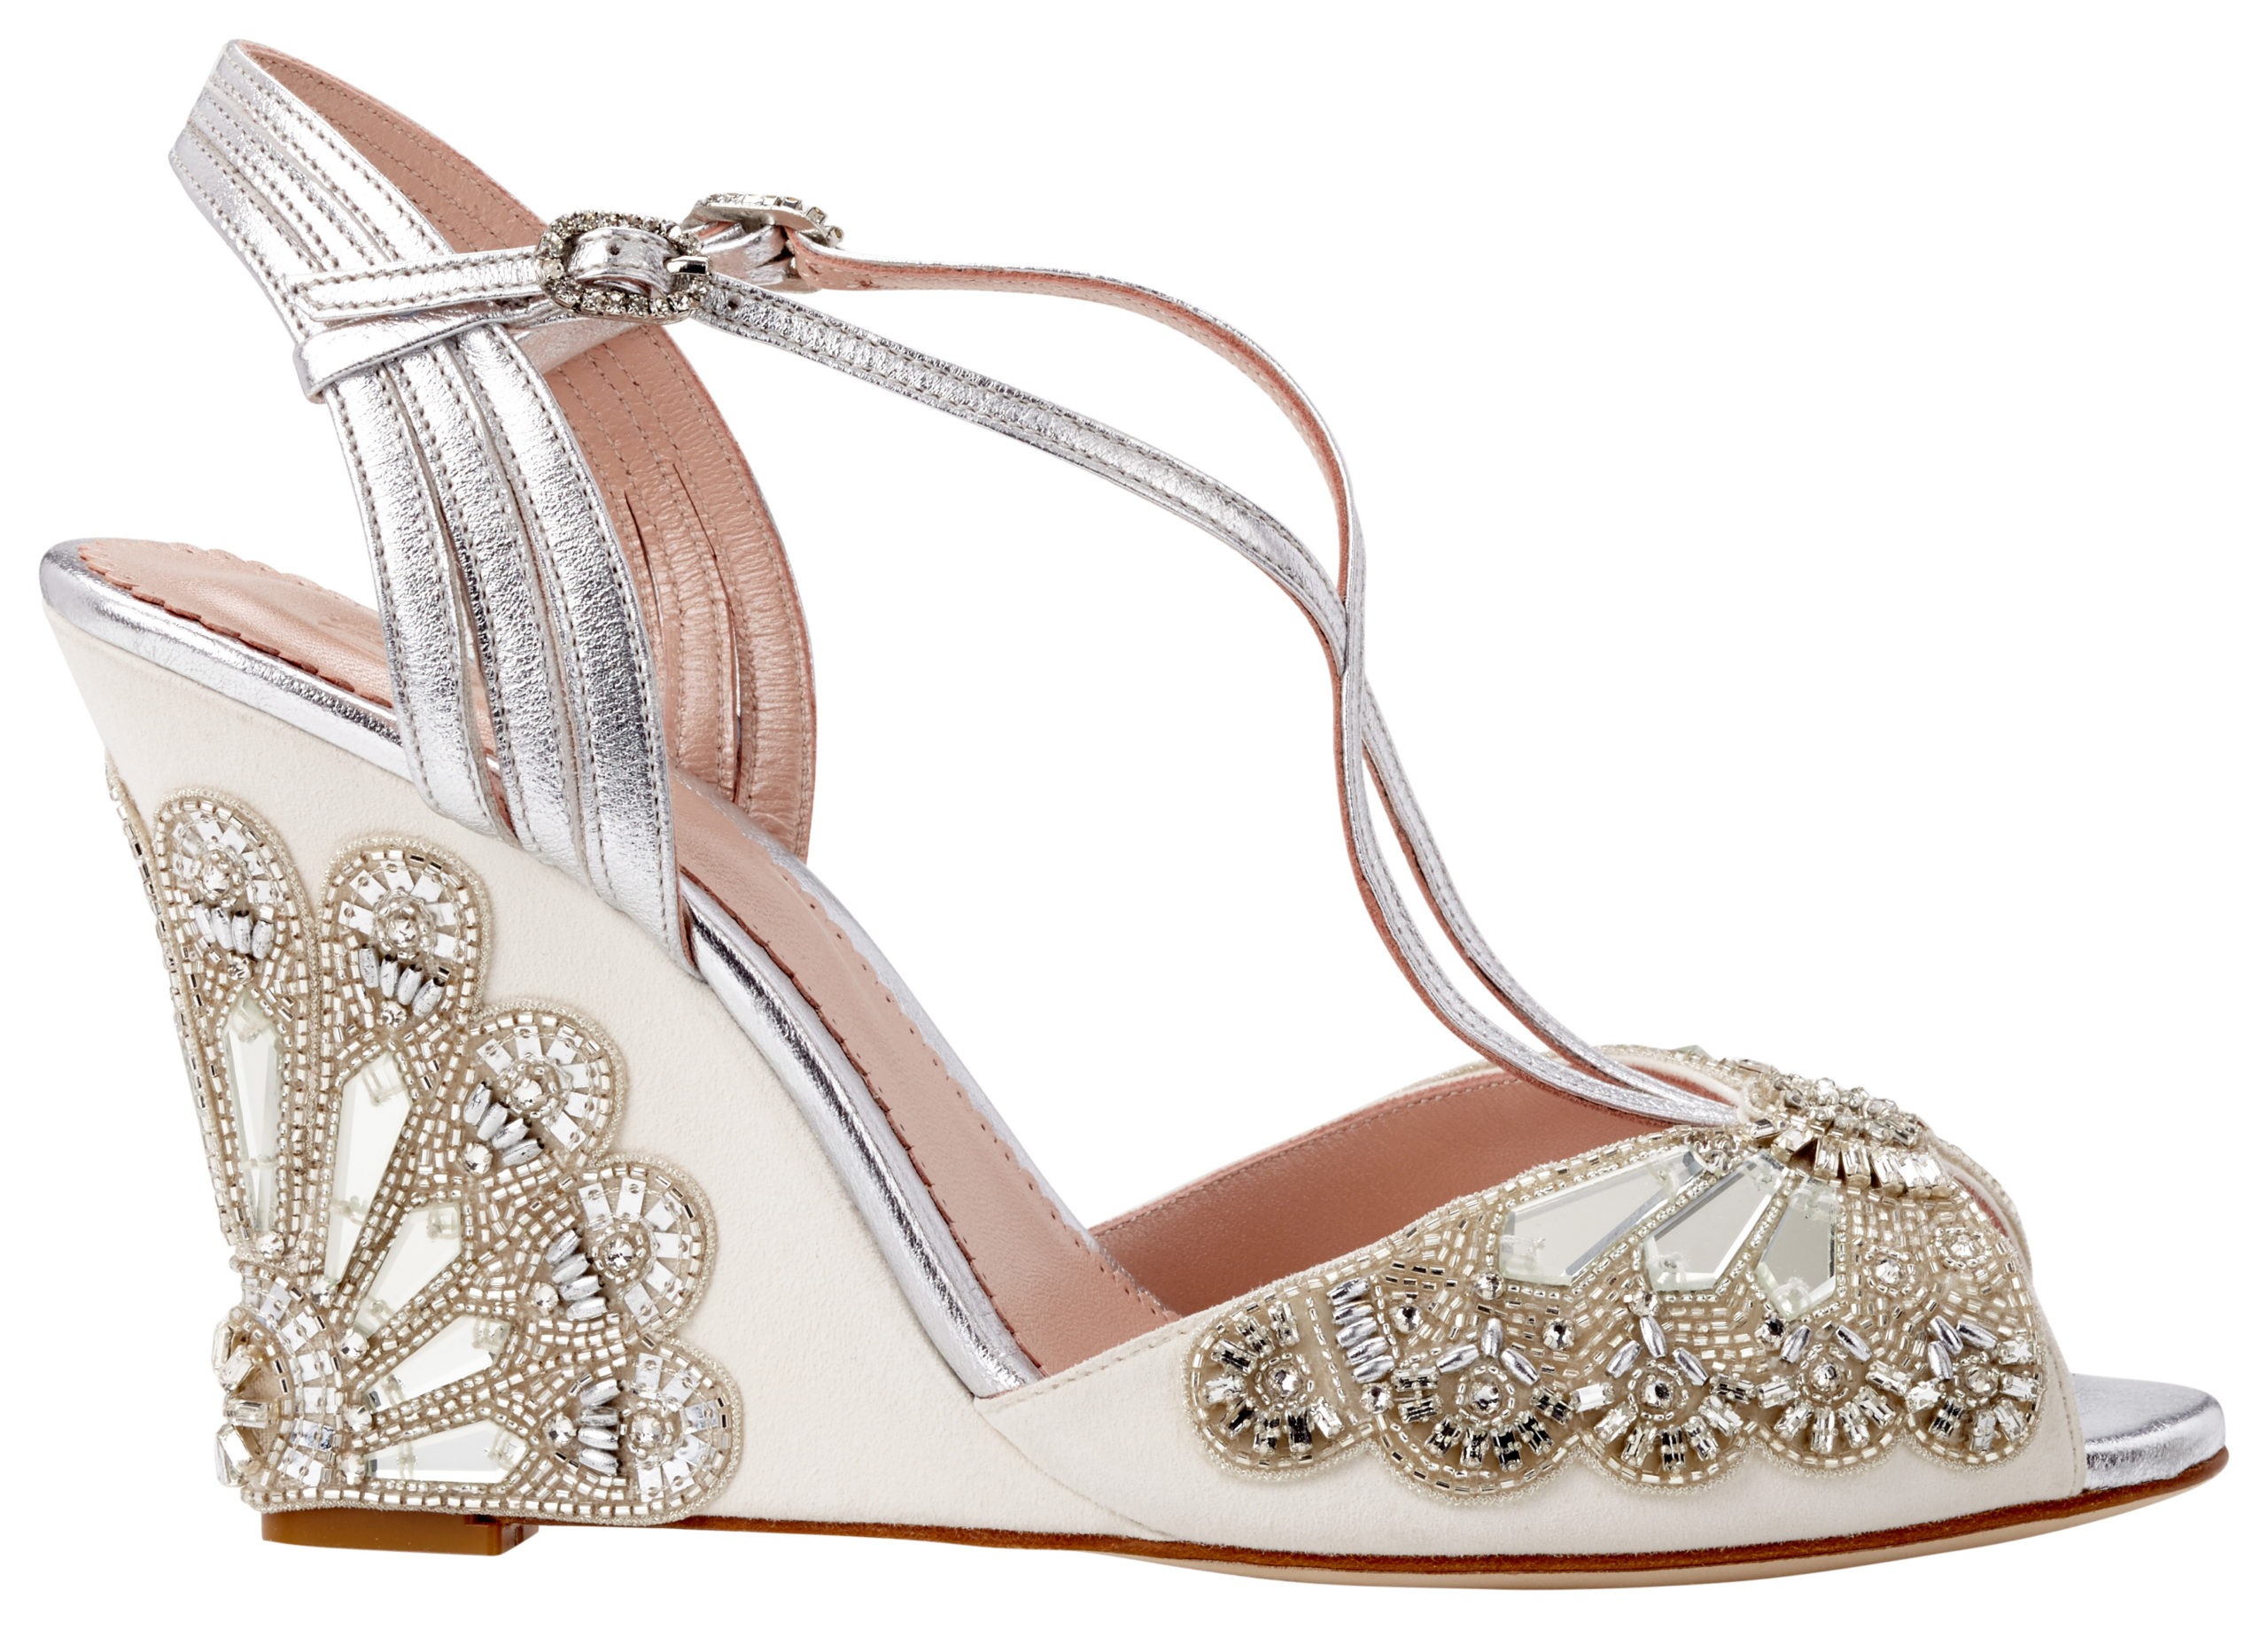 Heavenly heels – our pick of the season's wedding shoes